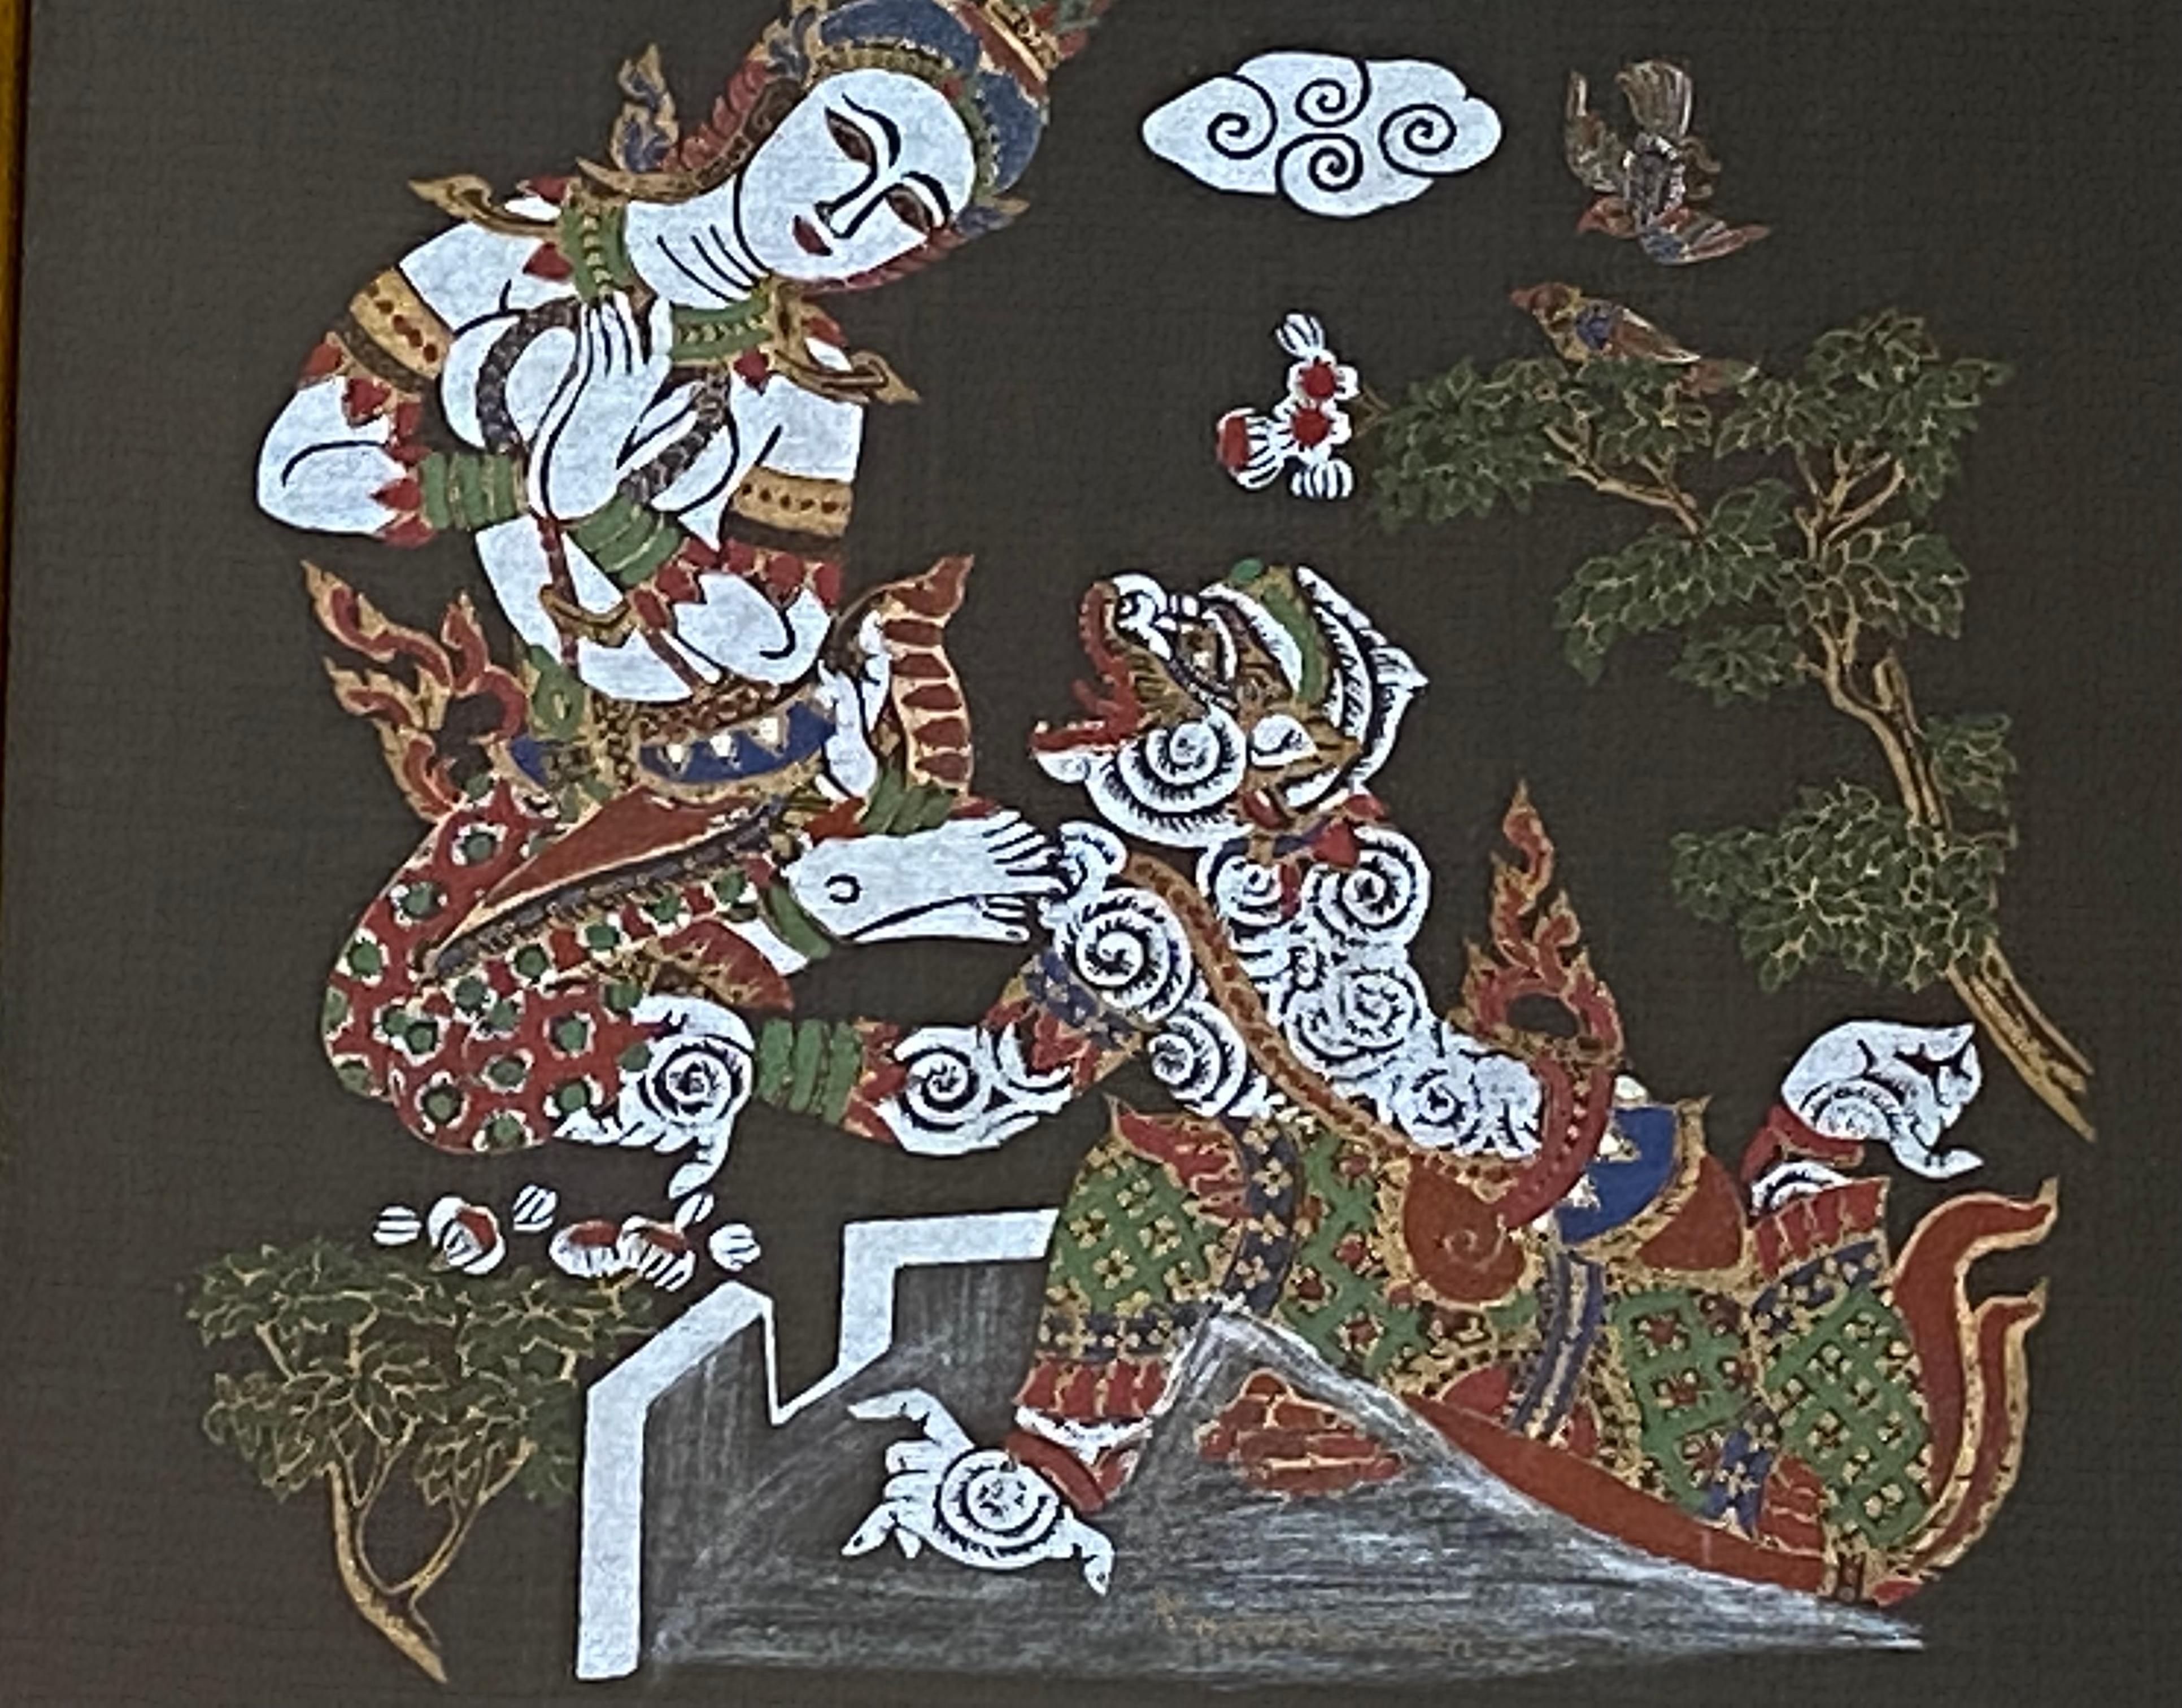 Hand painted acrylic painting on black silk fabric. Thai goddess with menacing dragon.  Unsigned. Signed “K Bangkok, Thailand” bottom right. Condition is excellent.  Circa 1990. Nicely professionally framed with gold leaf gallery frame.  Under